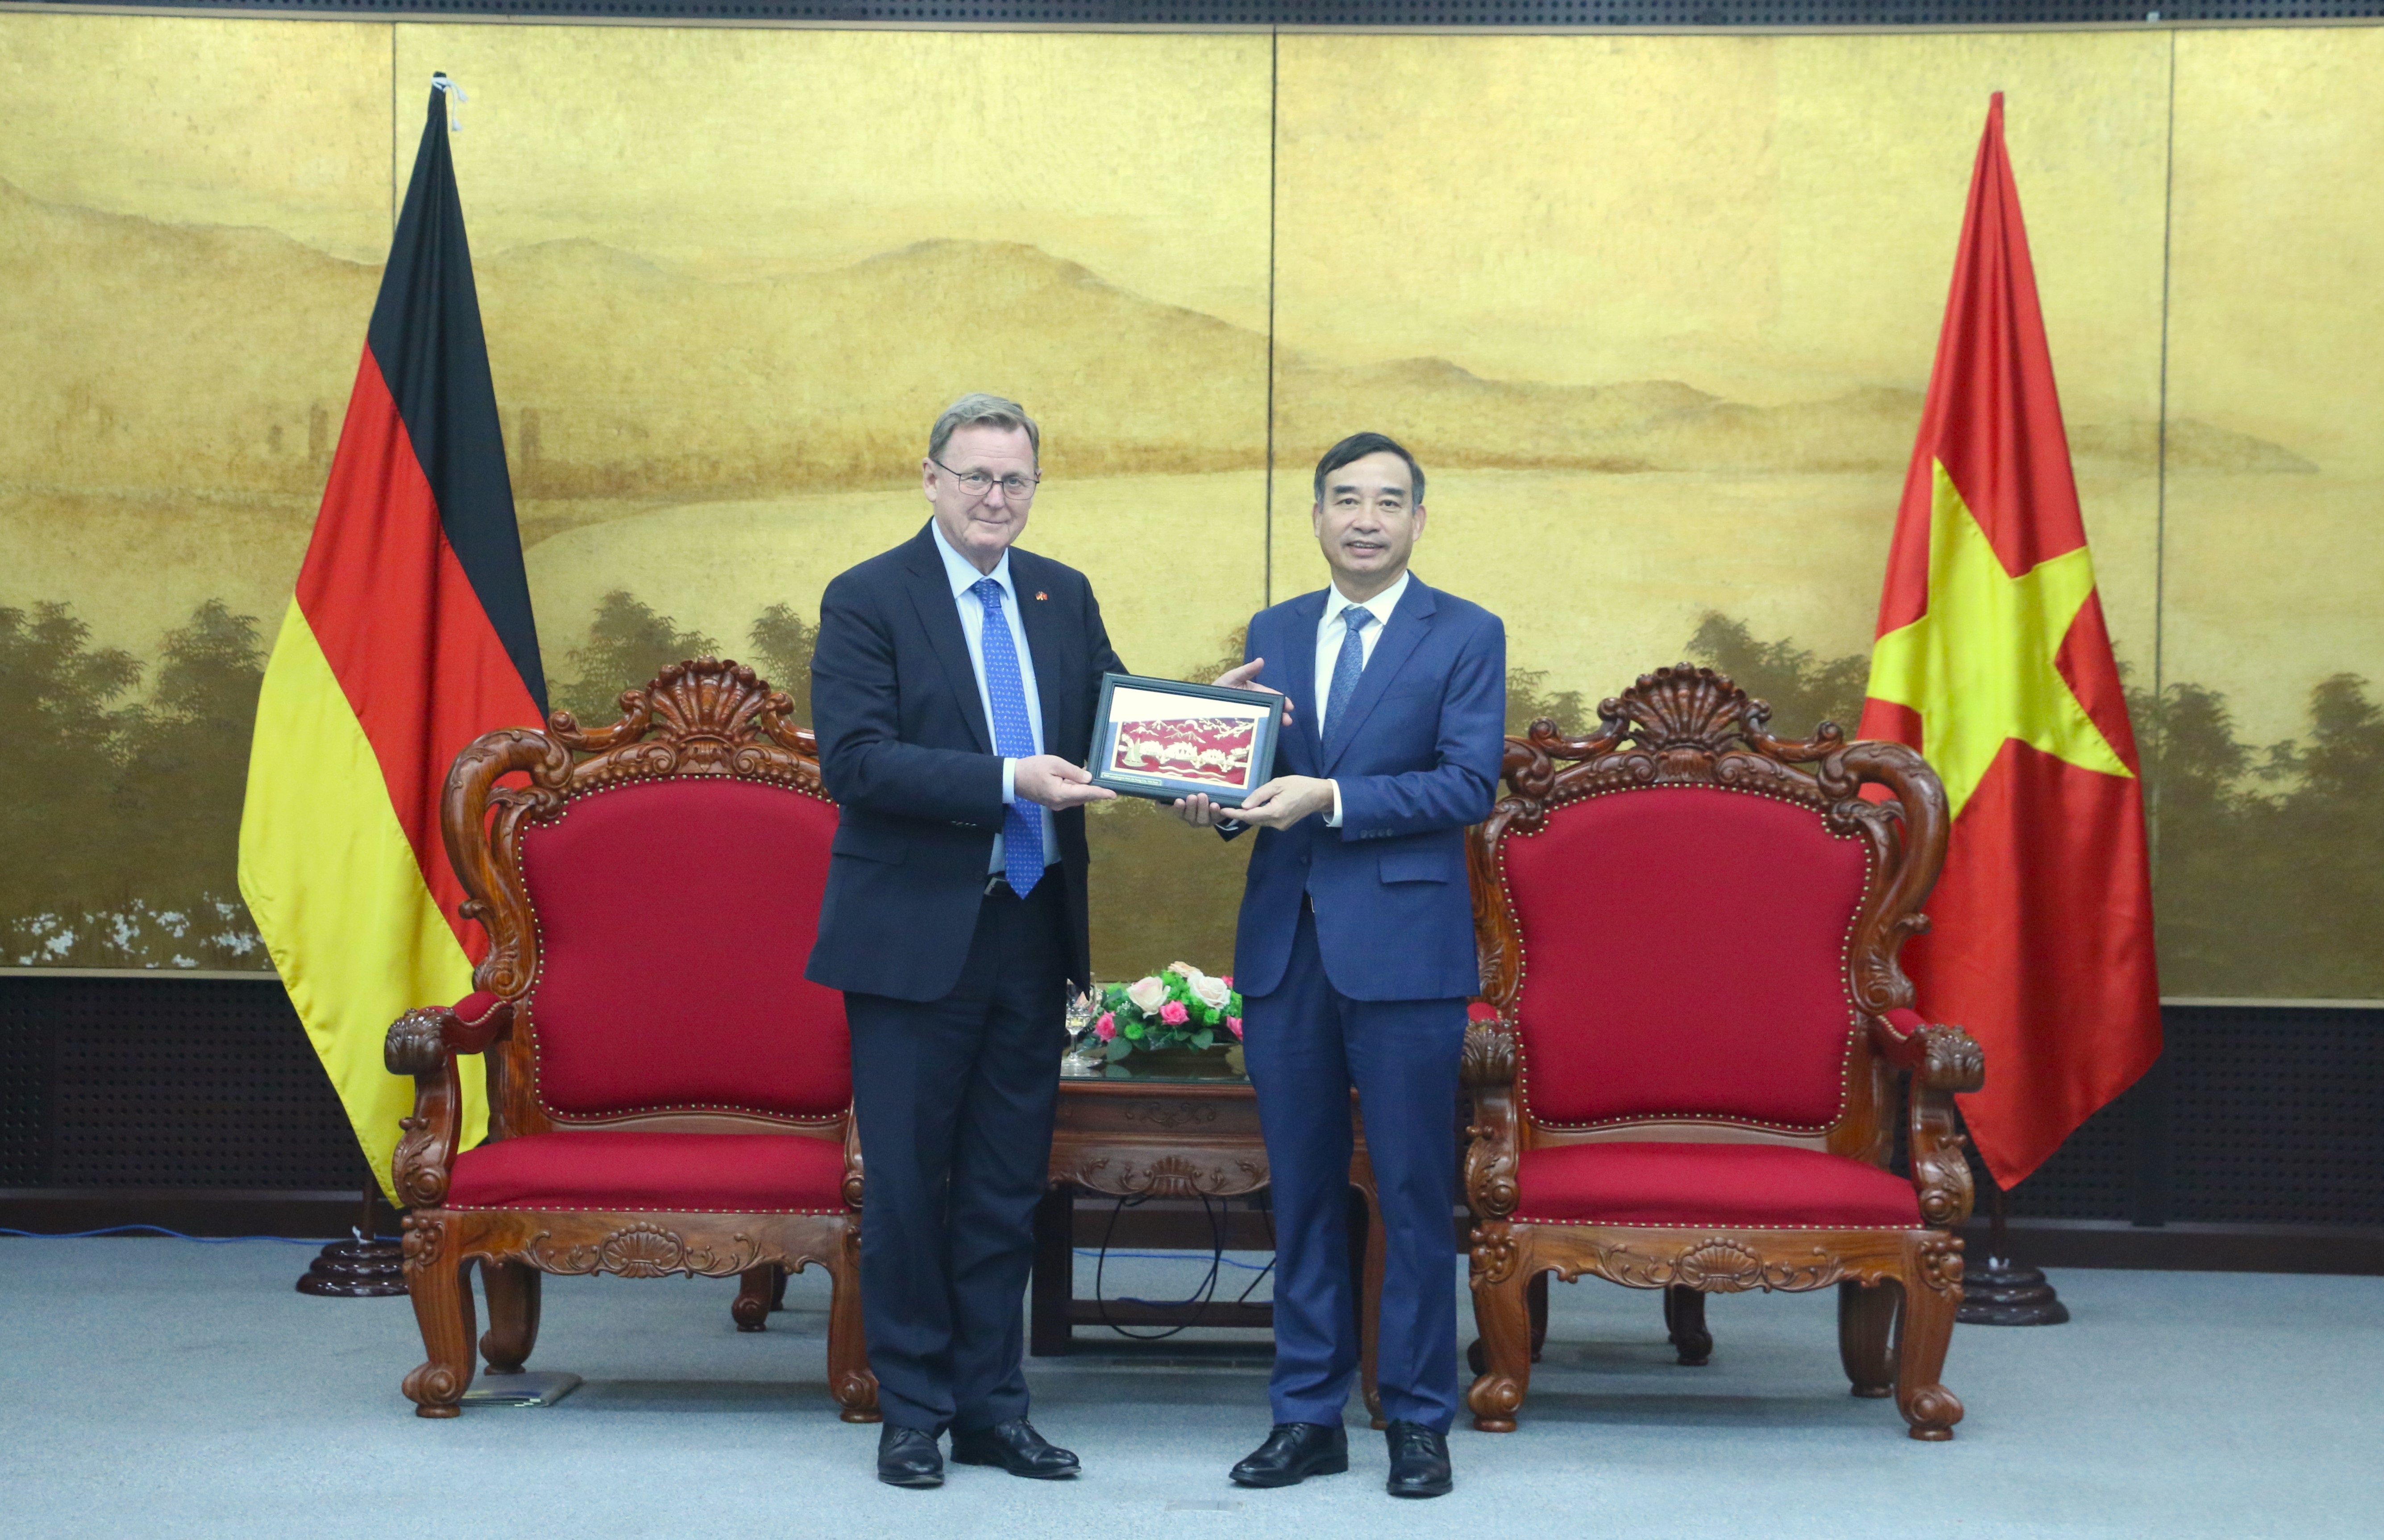 Chairman of the Da Nang People's Committee Le Trung Chinh (right) presents a souvenir to Minister-President of Thüringen state of Germany Bodo Ramelow. Photo: T.PHUONG